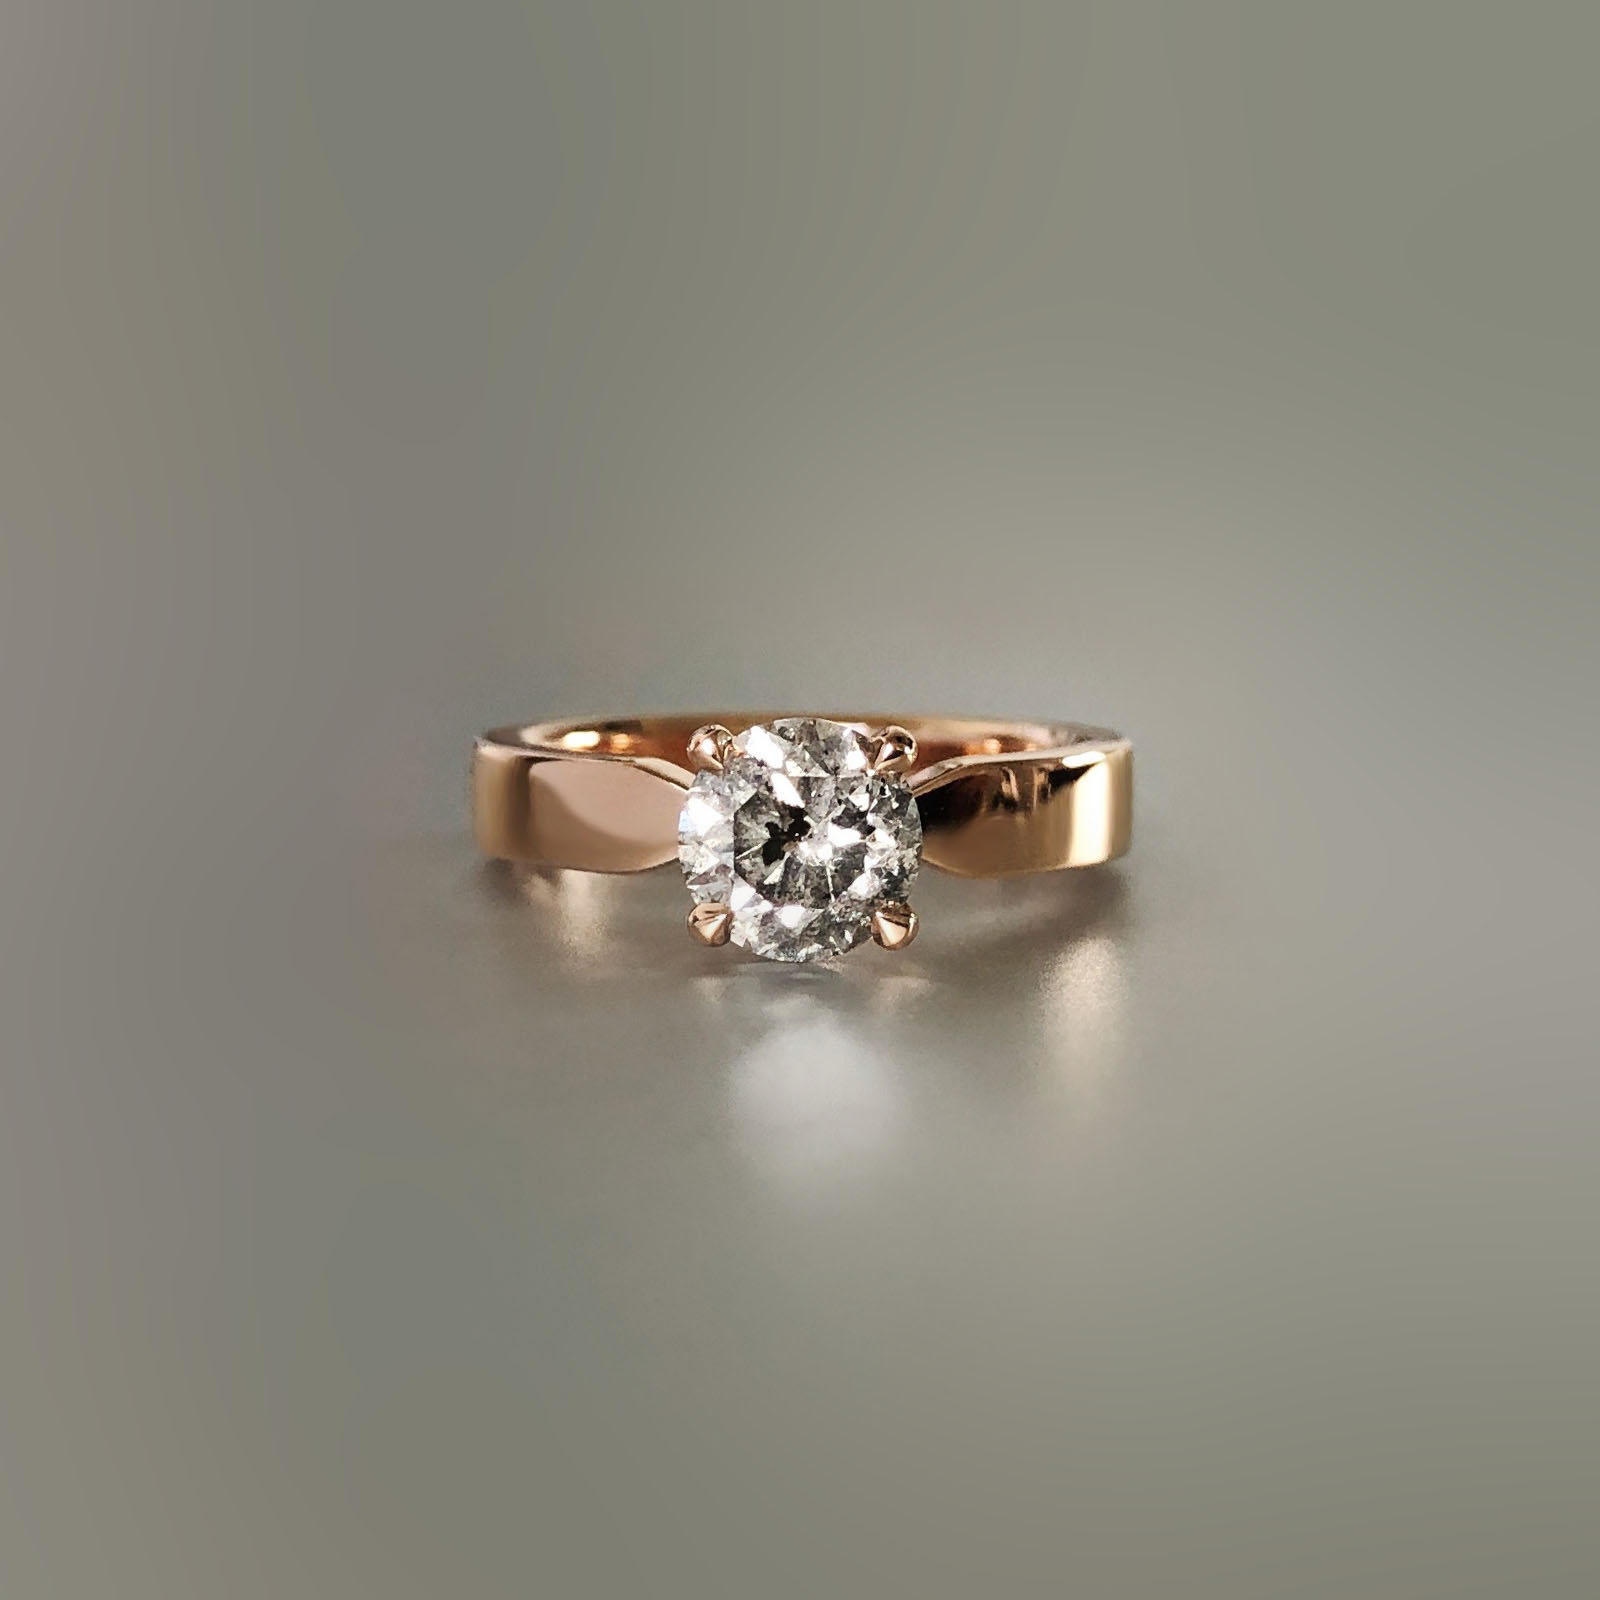 Salt and pepper solitaire diamond ring in rose gold